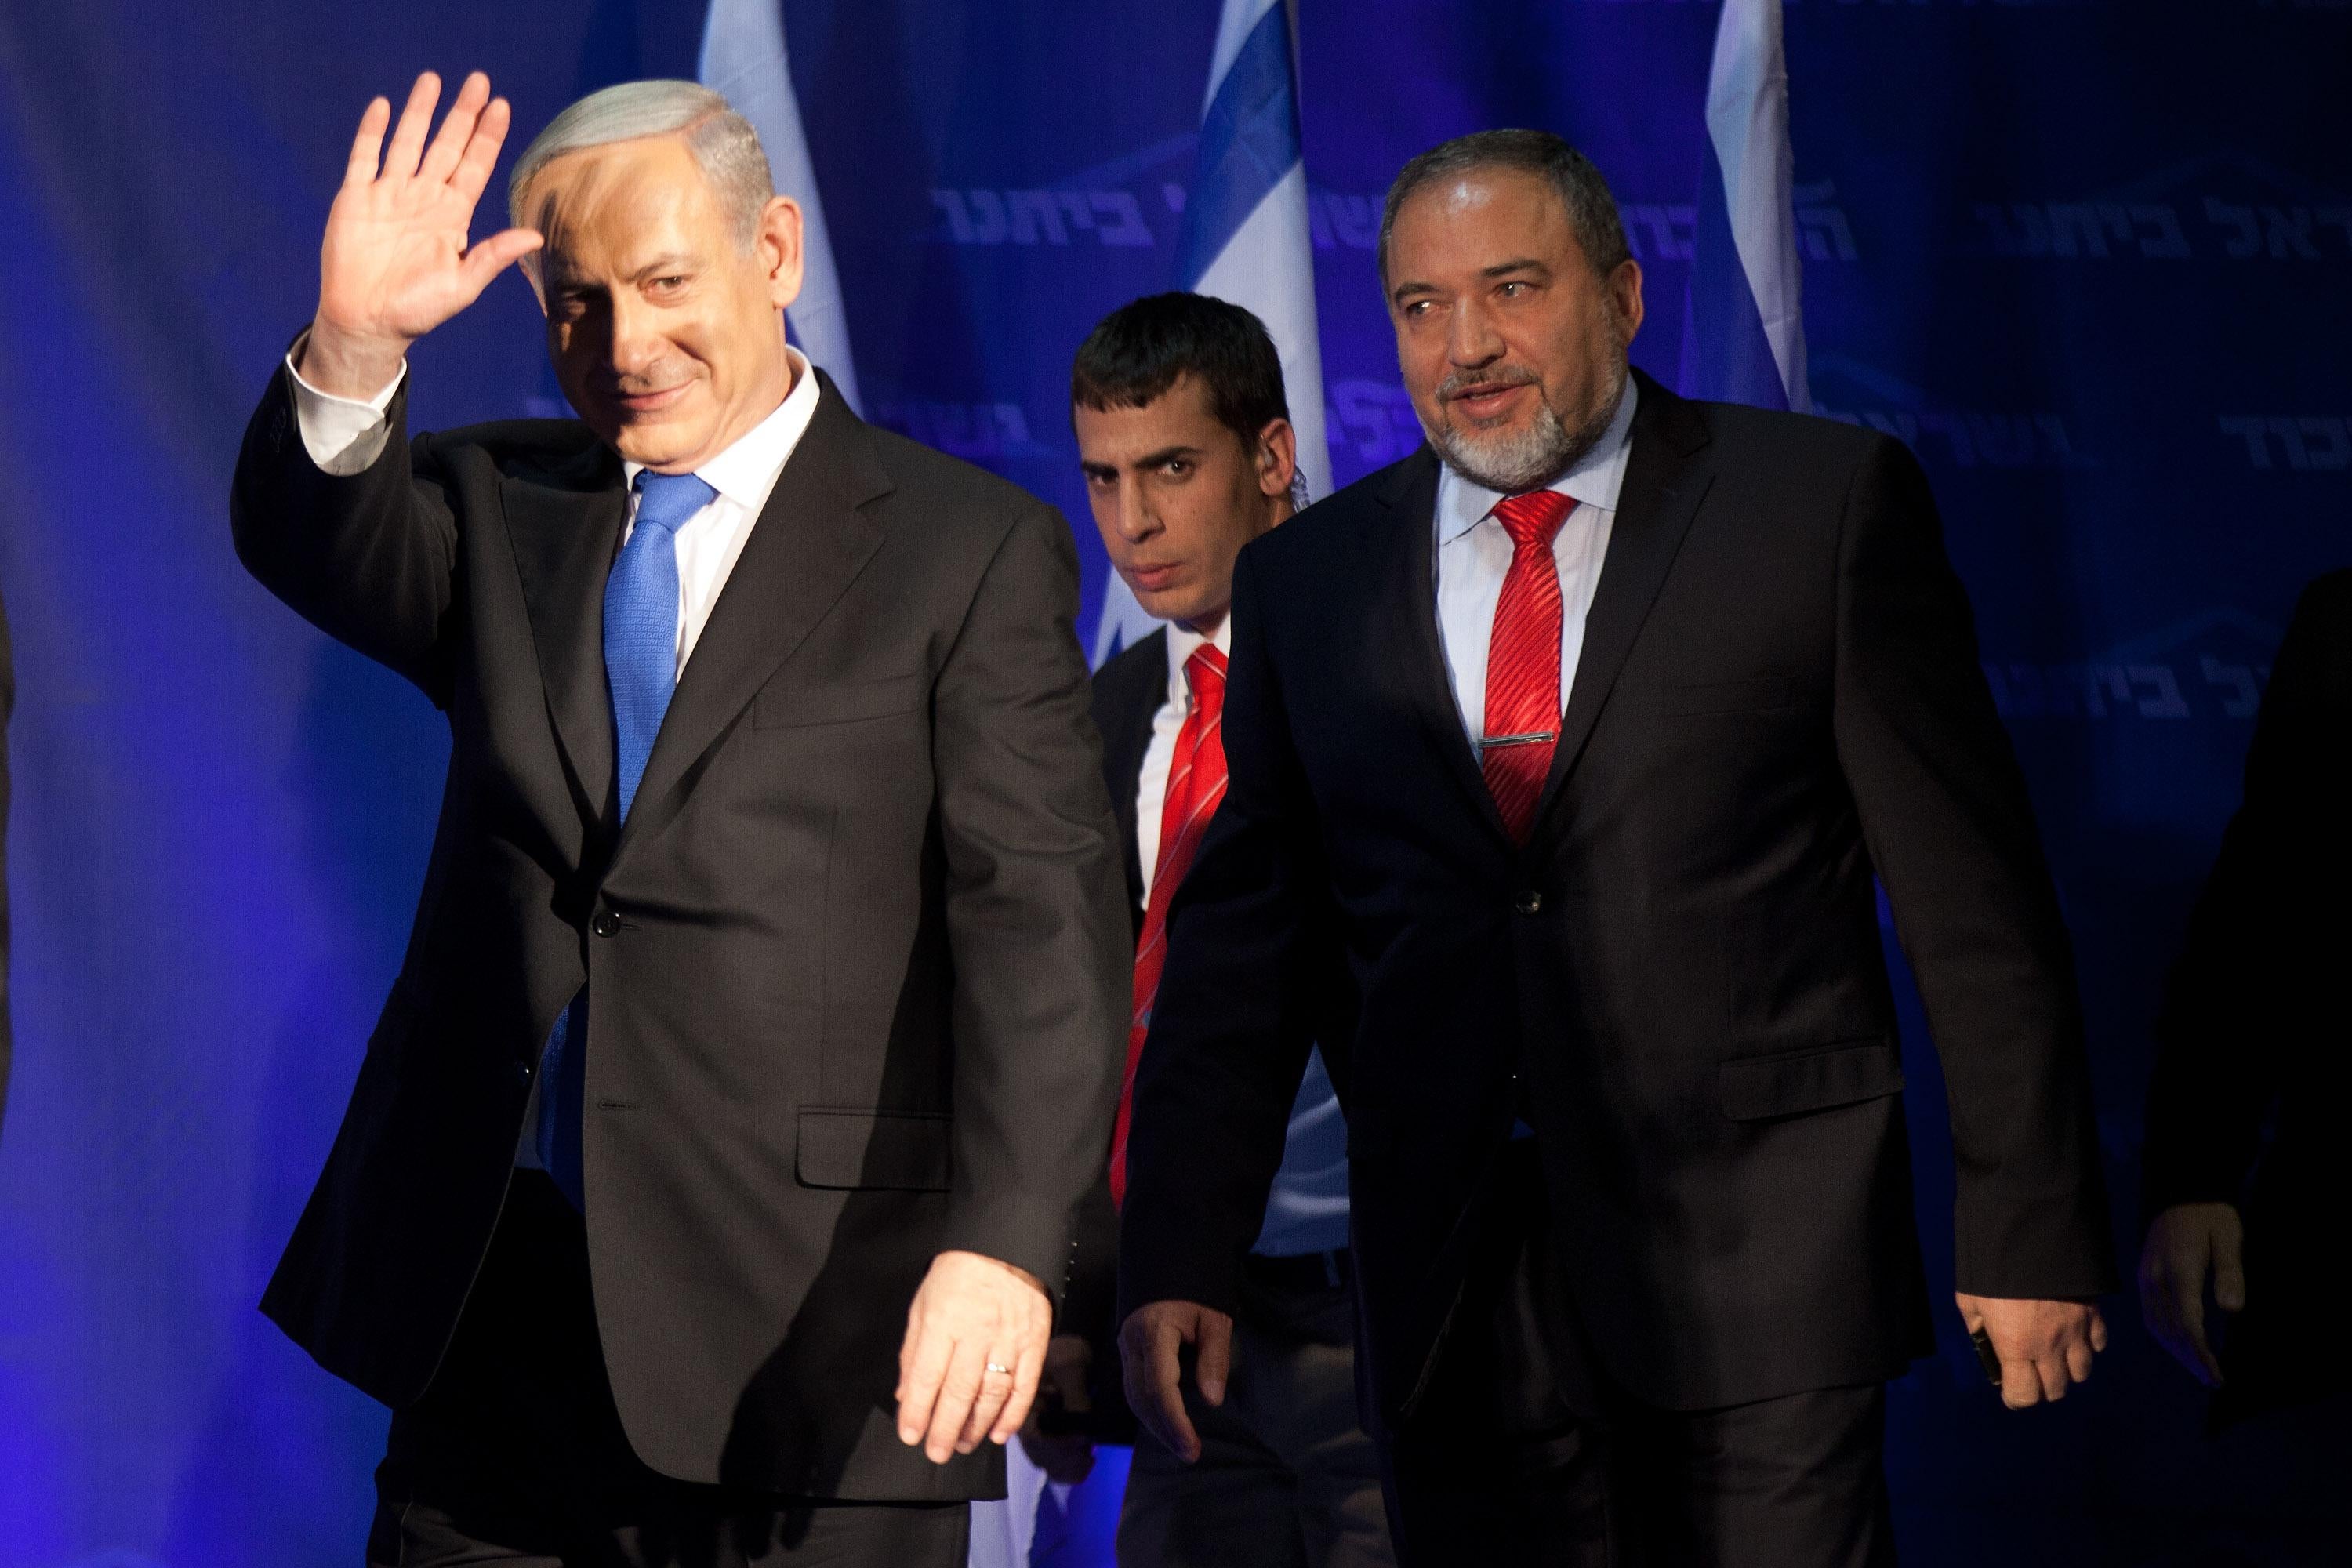  Israeli Prime Minister Benjamin Netanyahu waves to his supporters as he arrives with Former Israel Minister for Foreign Affairs Avigdor Liberman at his election campaign headquarters on Janurary 23, 2013 in Tel Aviv, Israel.